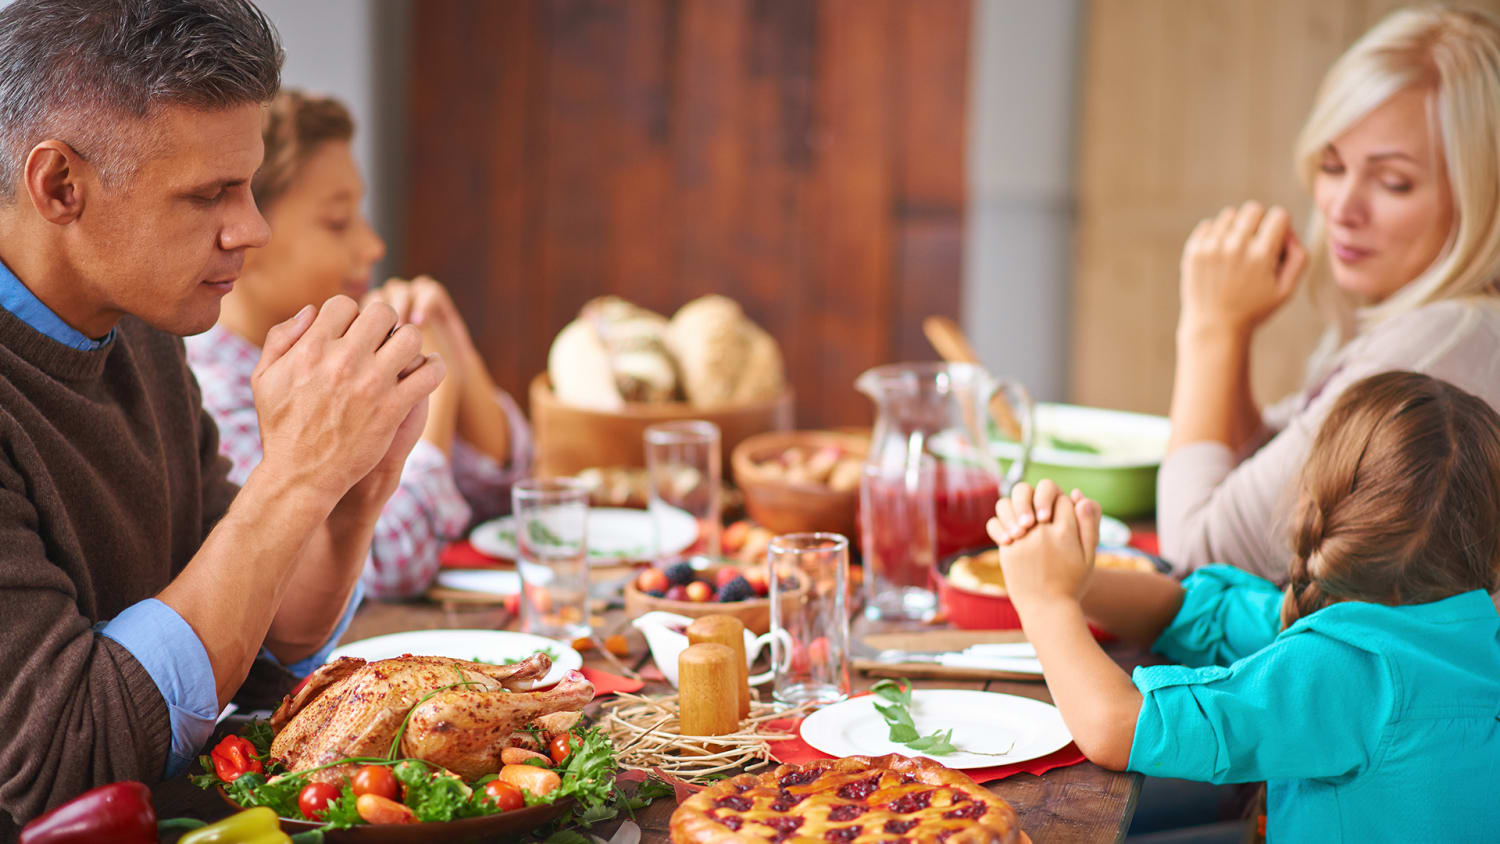 Rude! How to respond to 5 parent-judging comments at the Thanksgiving table